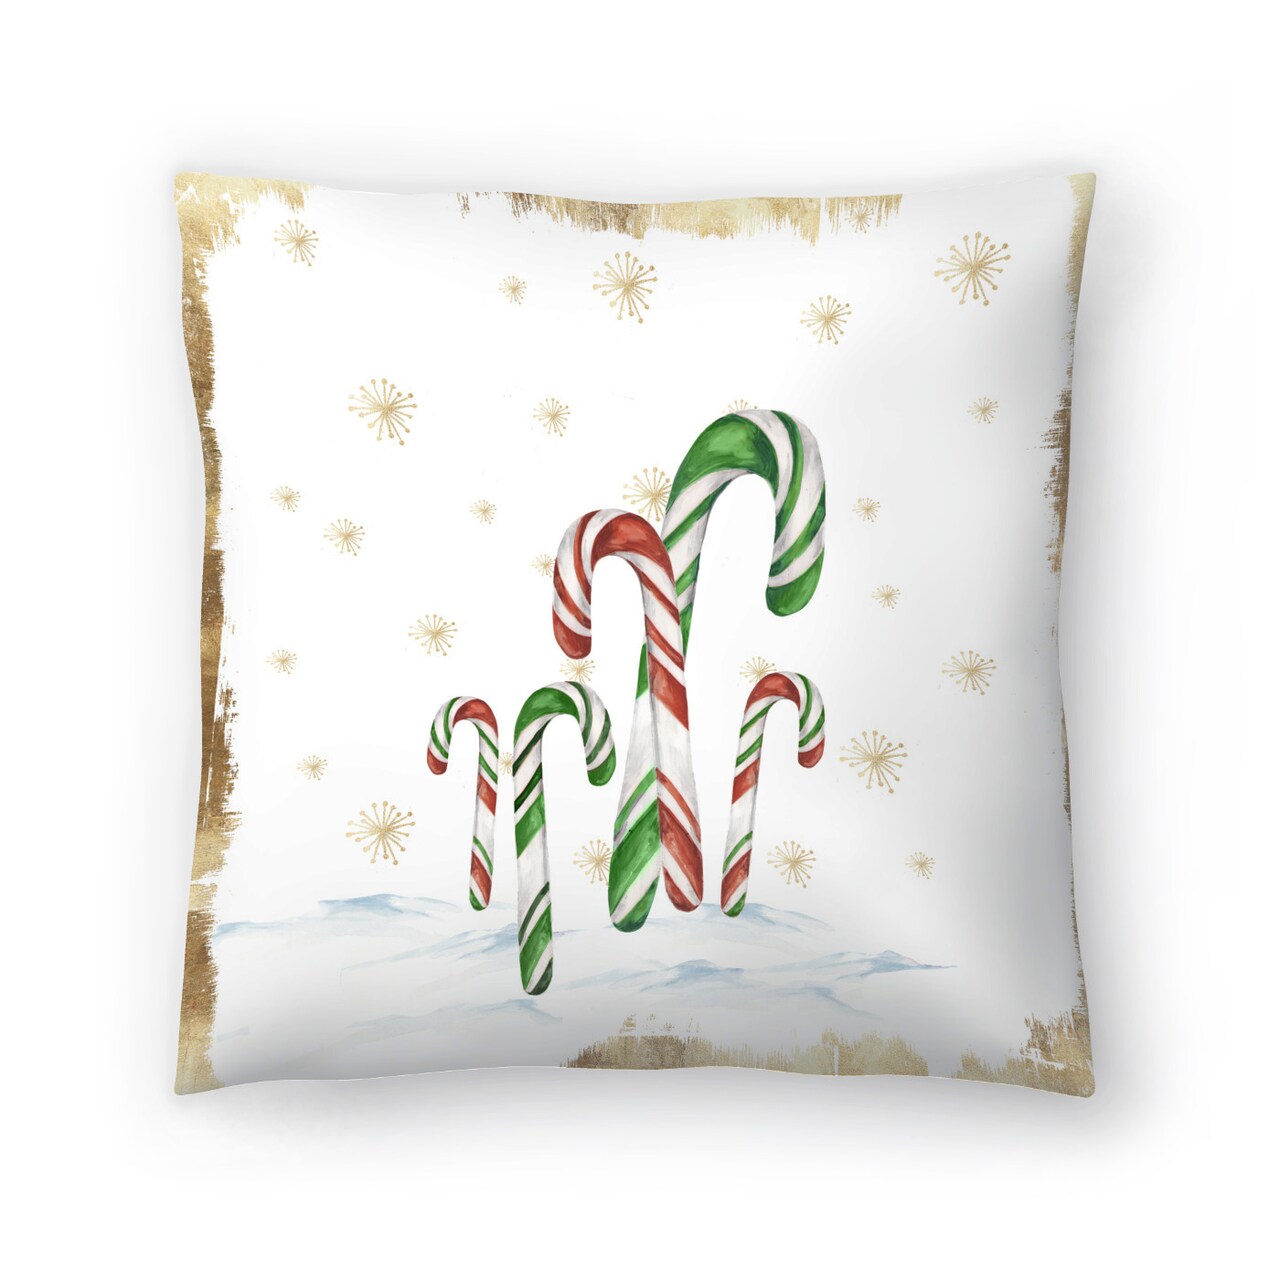 Snowy Candycanes I by Pi Holiday Throw Pillow Americanflat Decorative Pillow